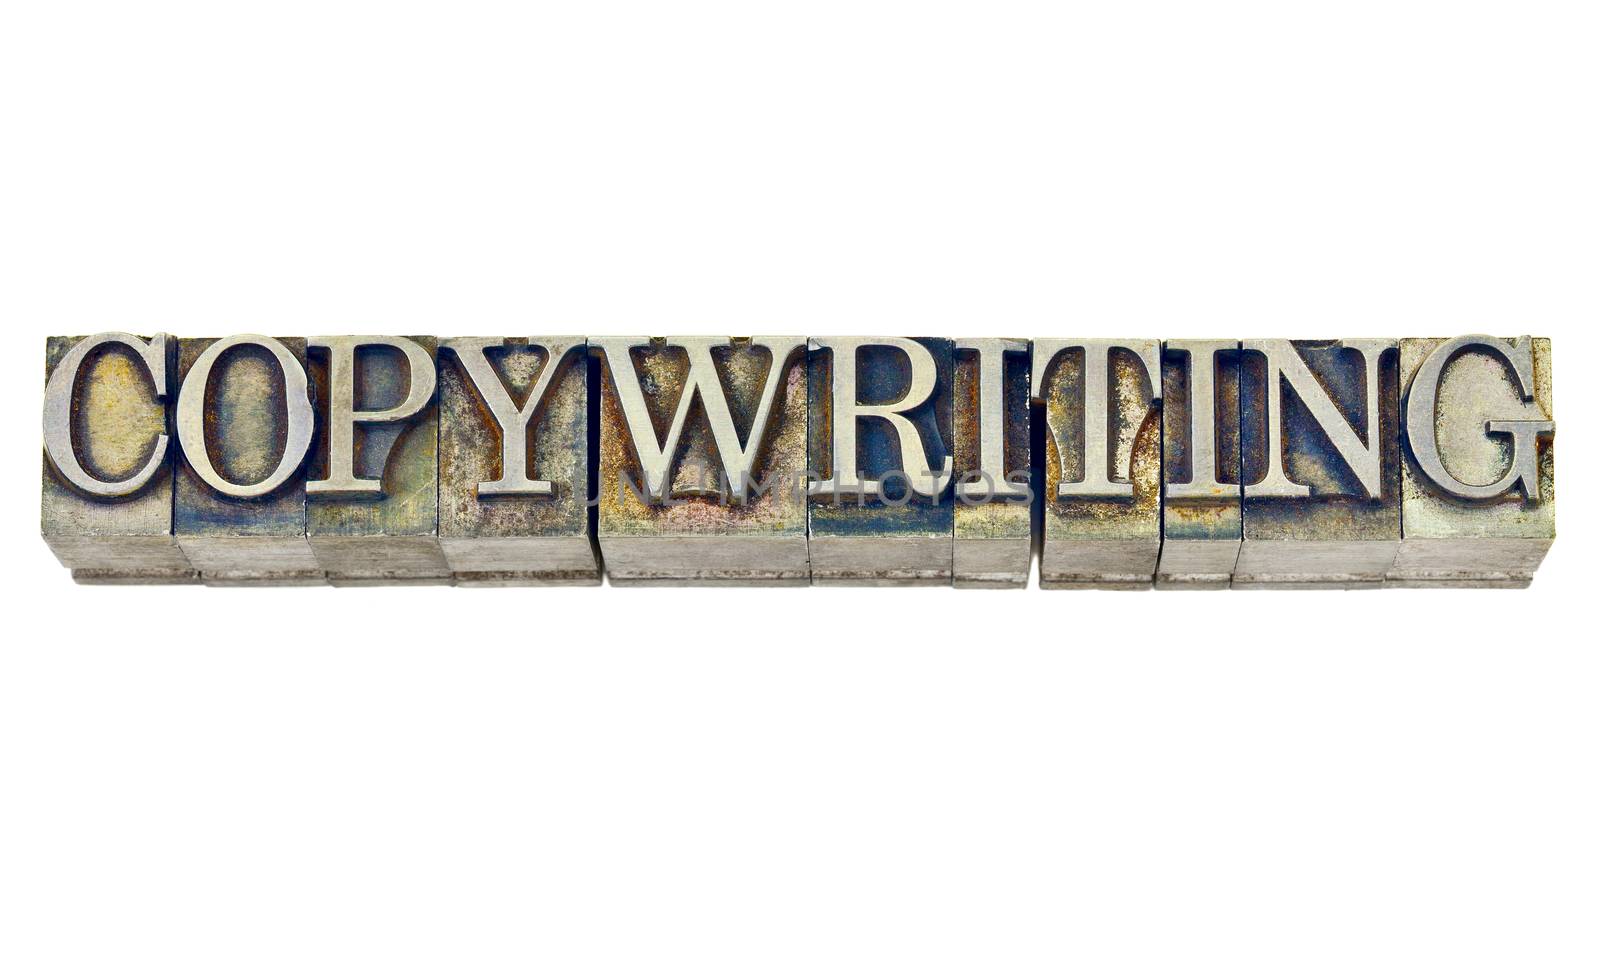 copywriting word - isolated word in grunge vintage letterpress metal type stained b\y inks